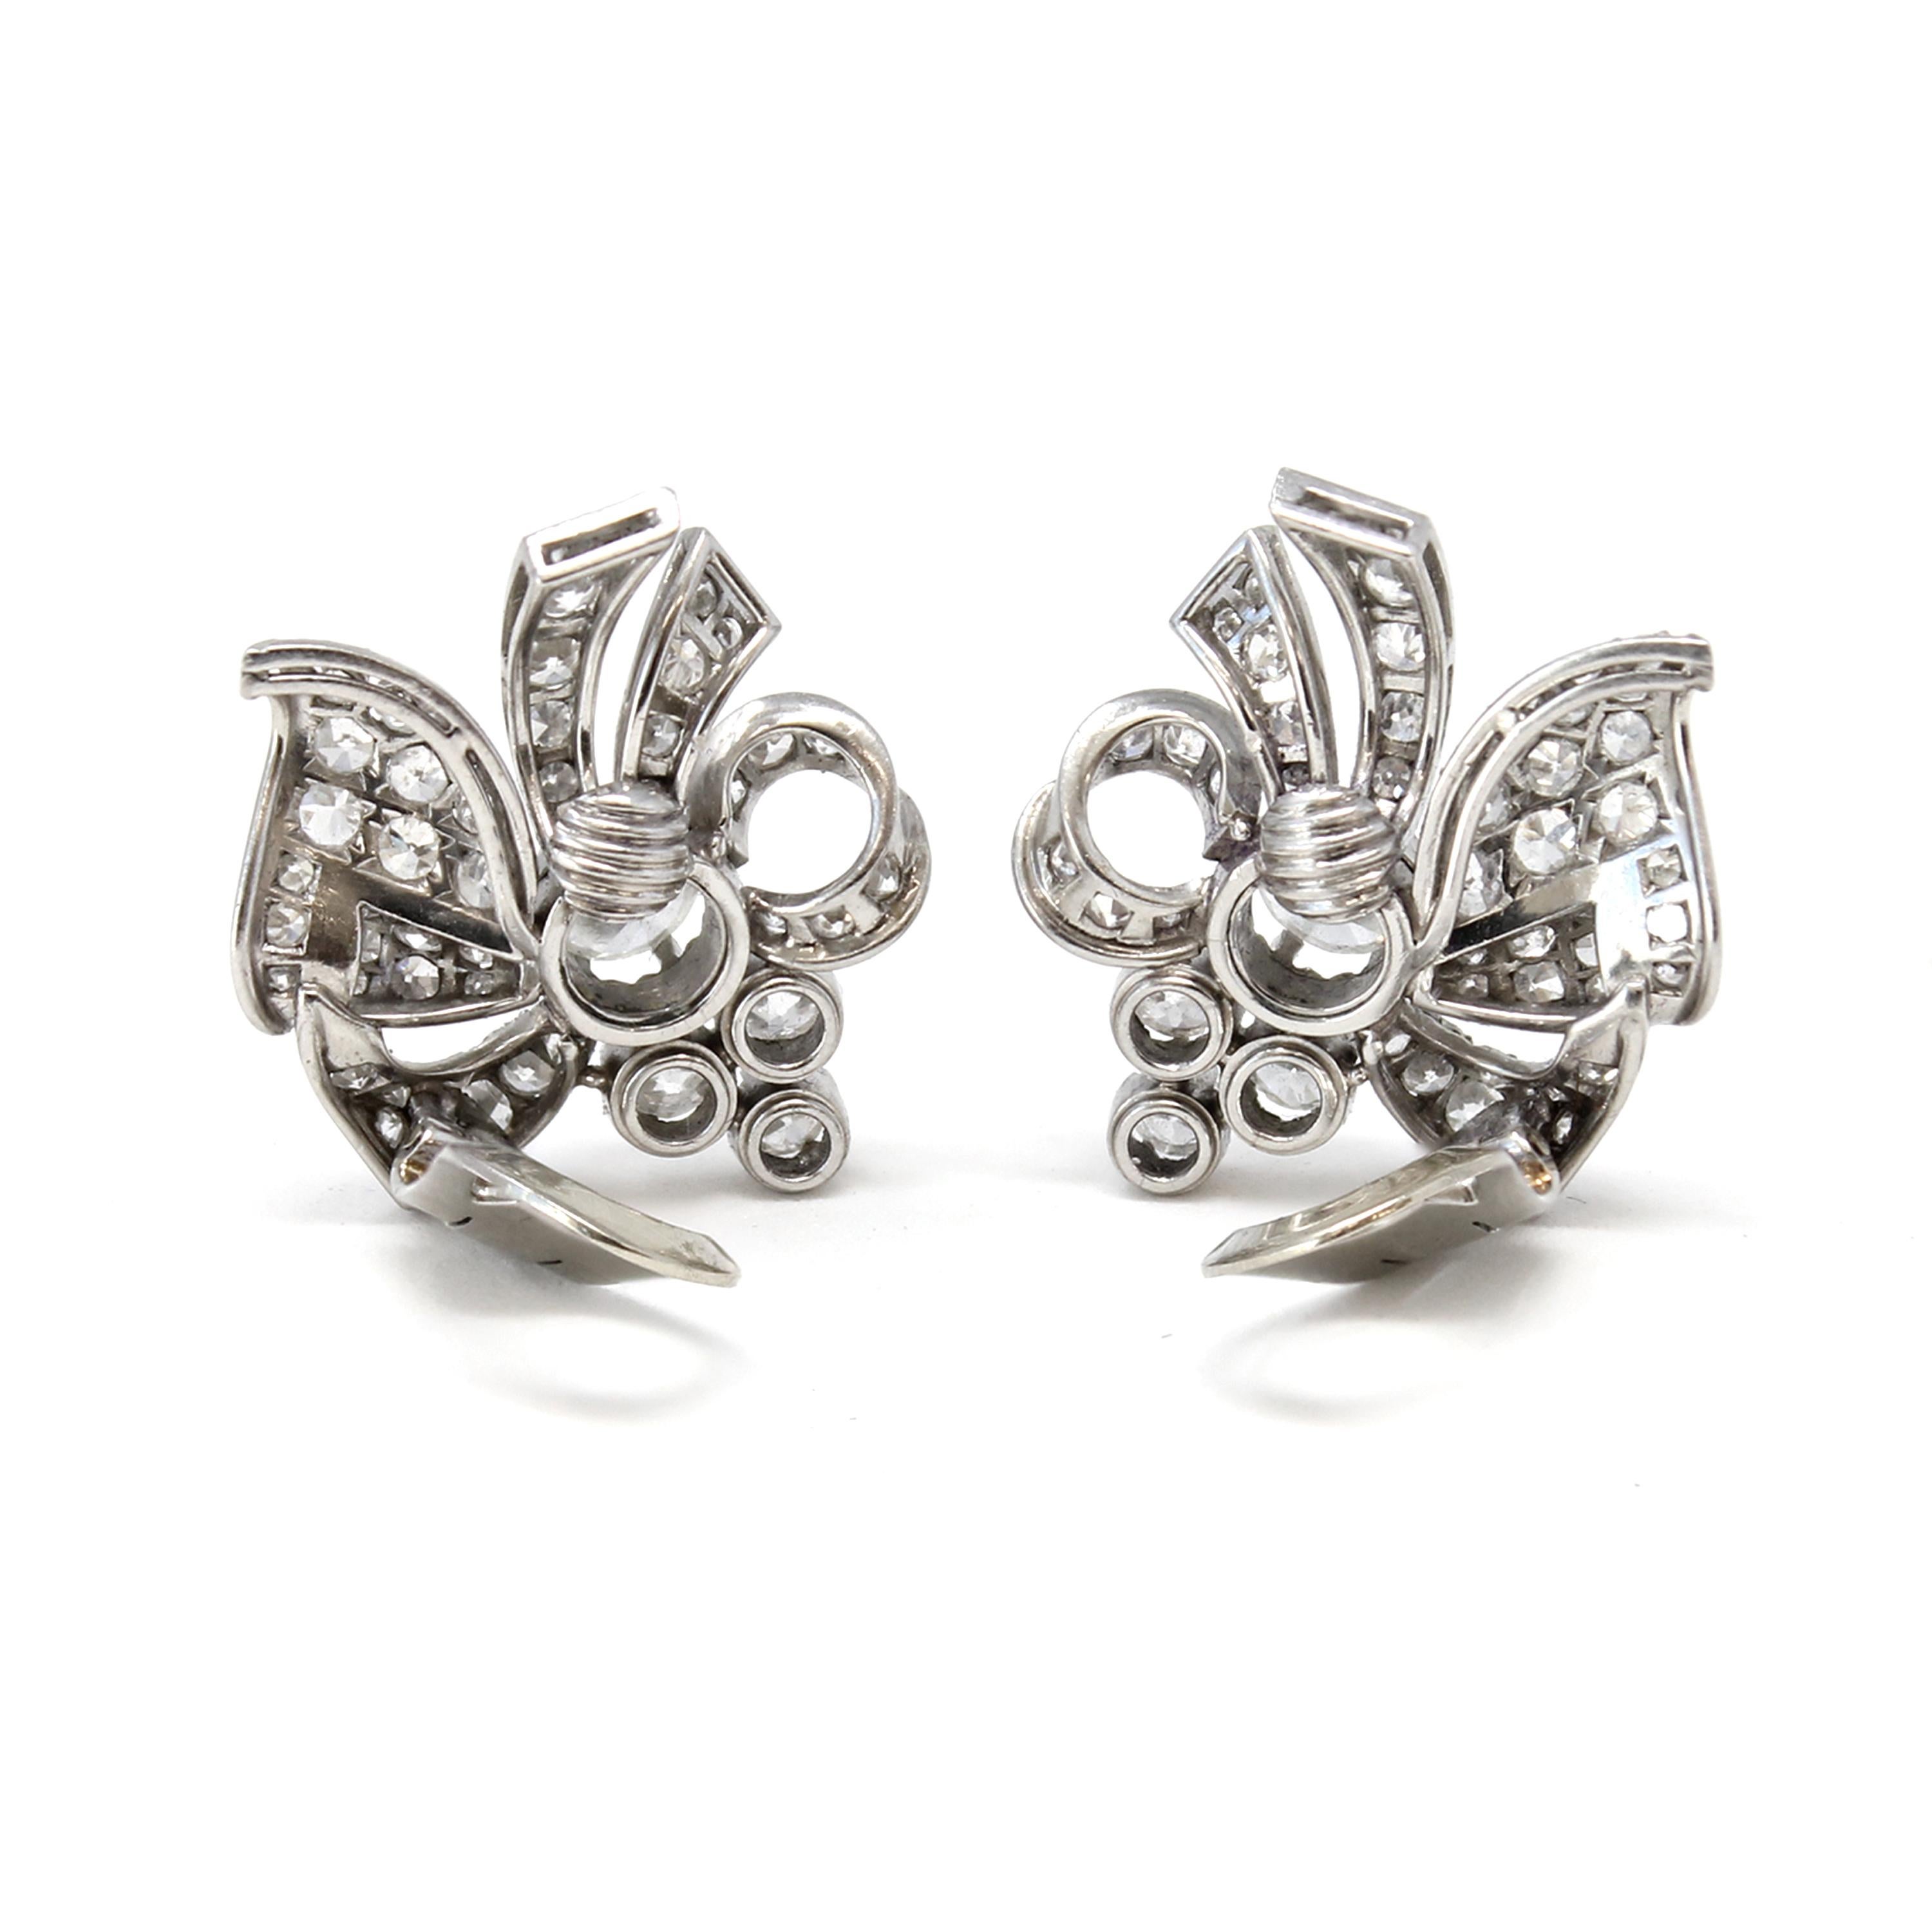 A pair of vintage mid-century Platinum and Diamond clip bow-style earrings from the late 1940s. Delicate volutes accented with sparkling Diamonds surround in a graceful movement the 3.50 carat Diamond that adorns the center of each earring.